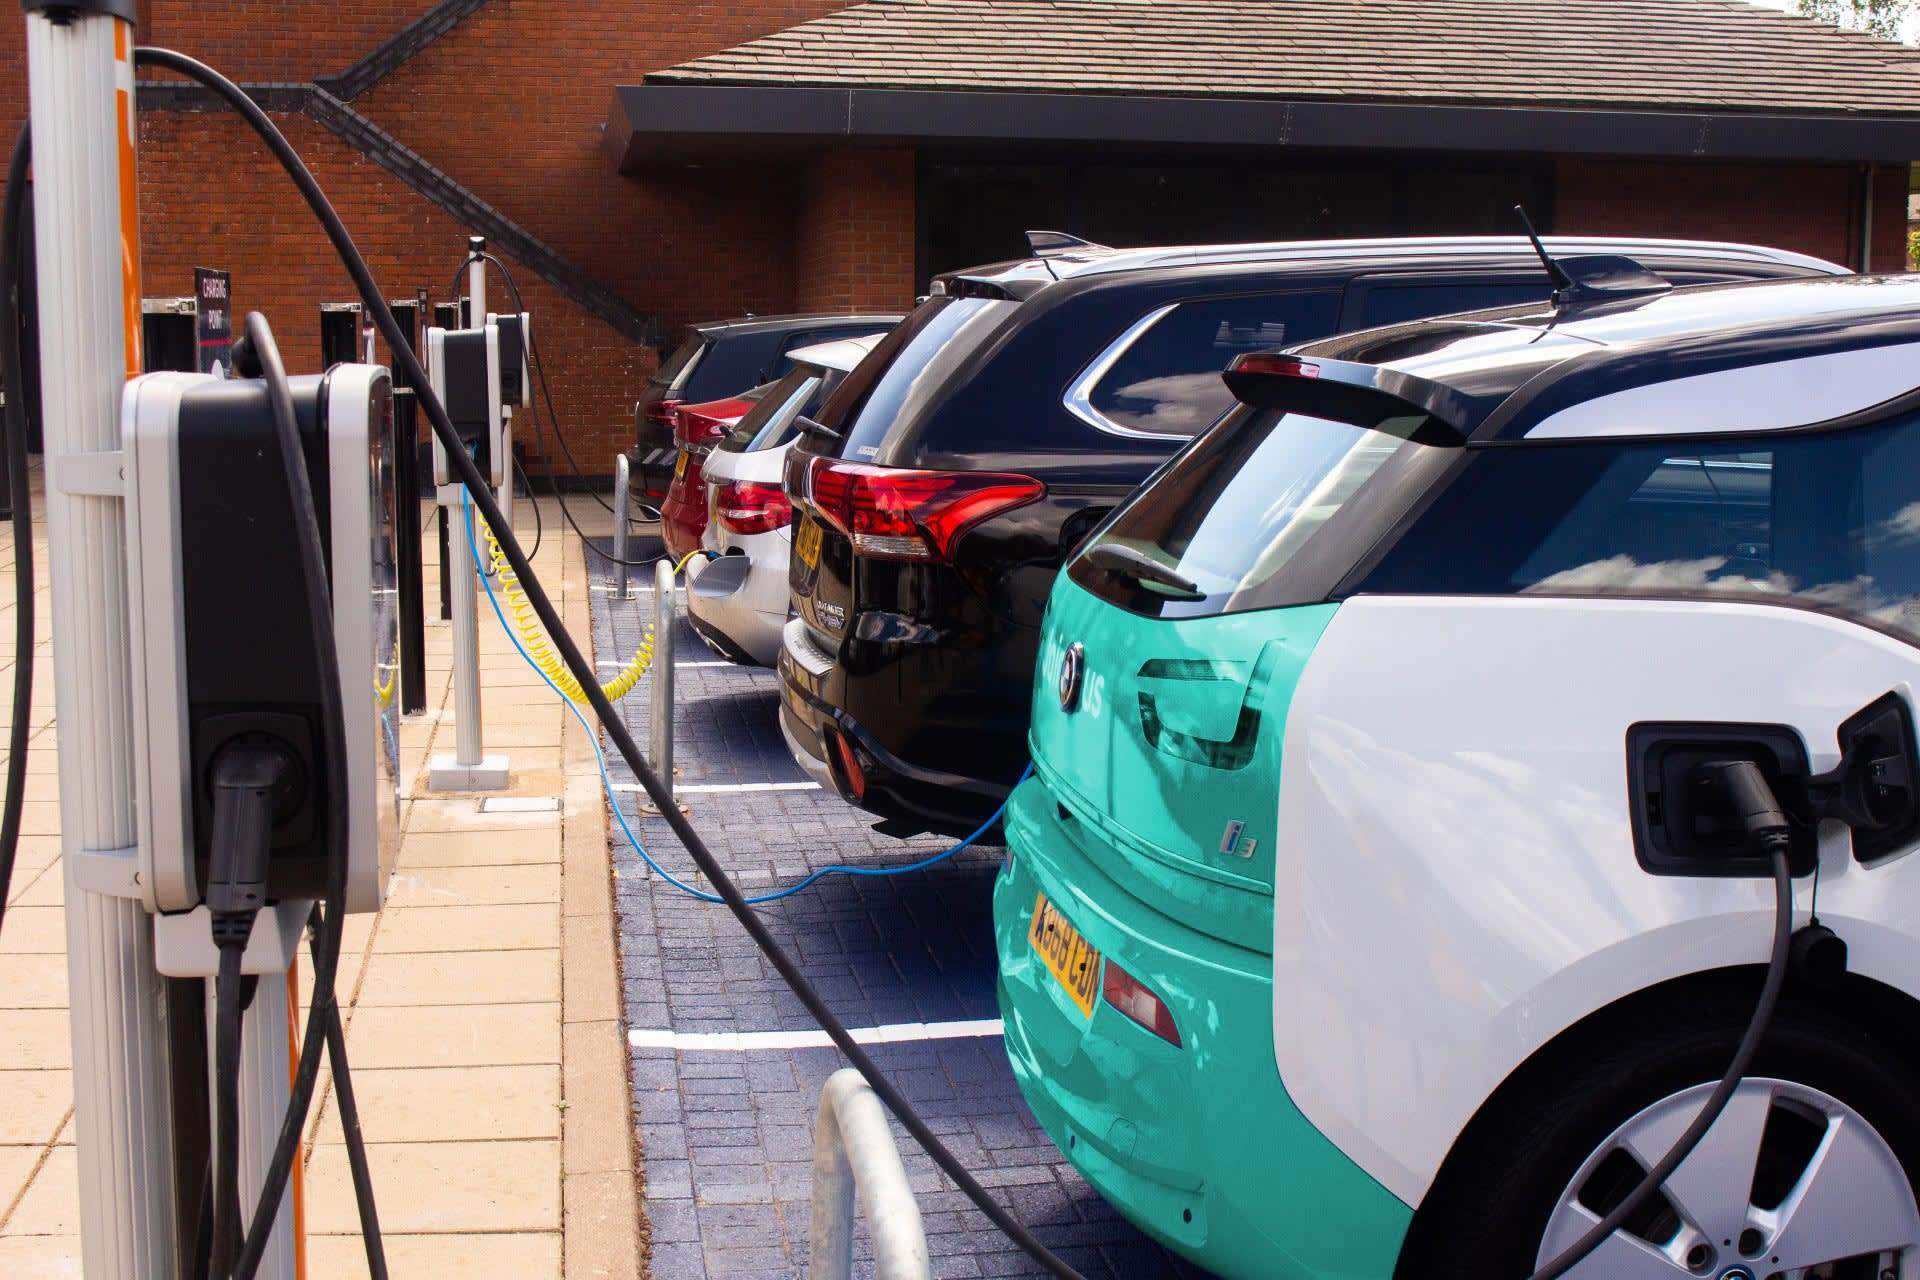 We used electric vehicles to save 11.5 tonnes of CO2 emissions